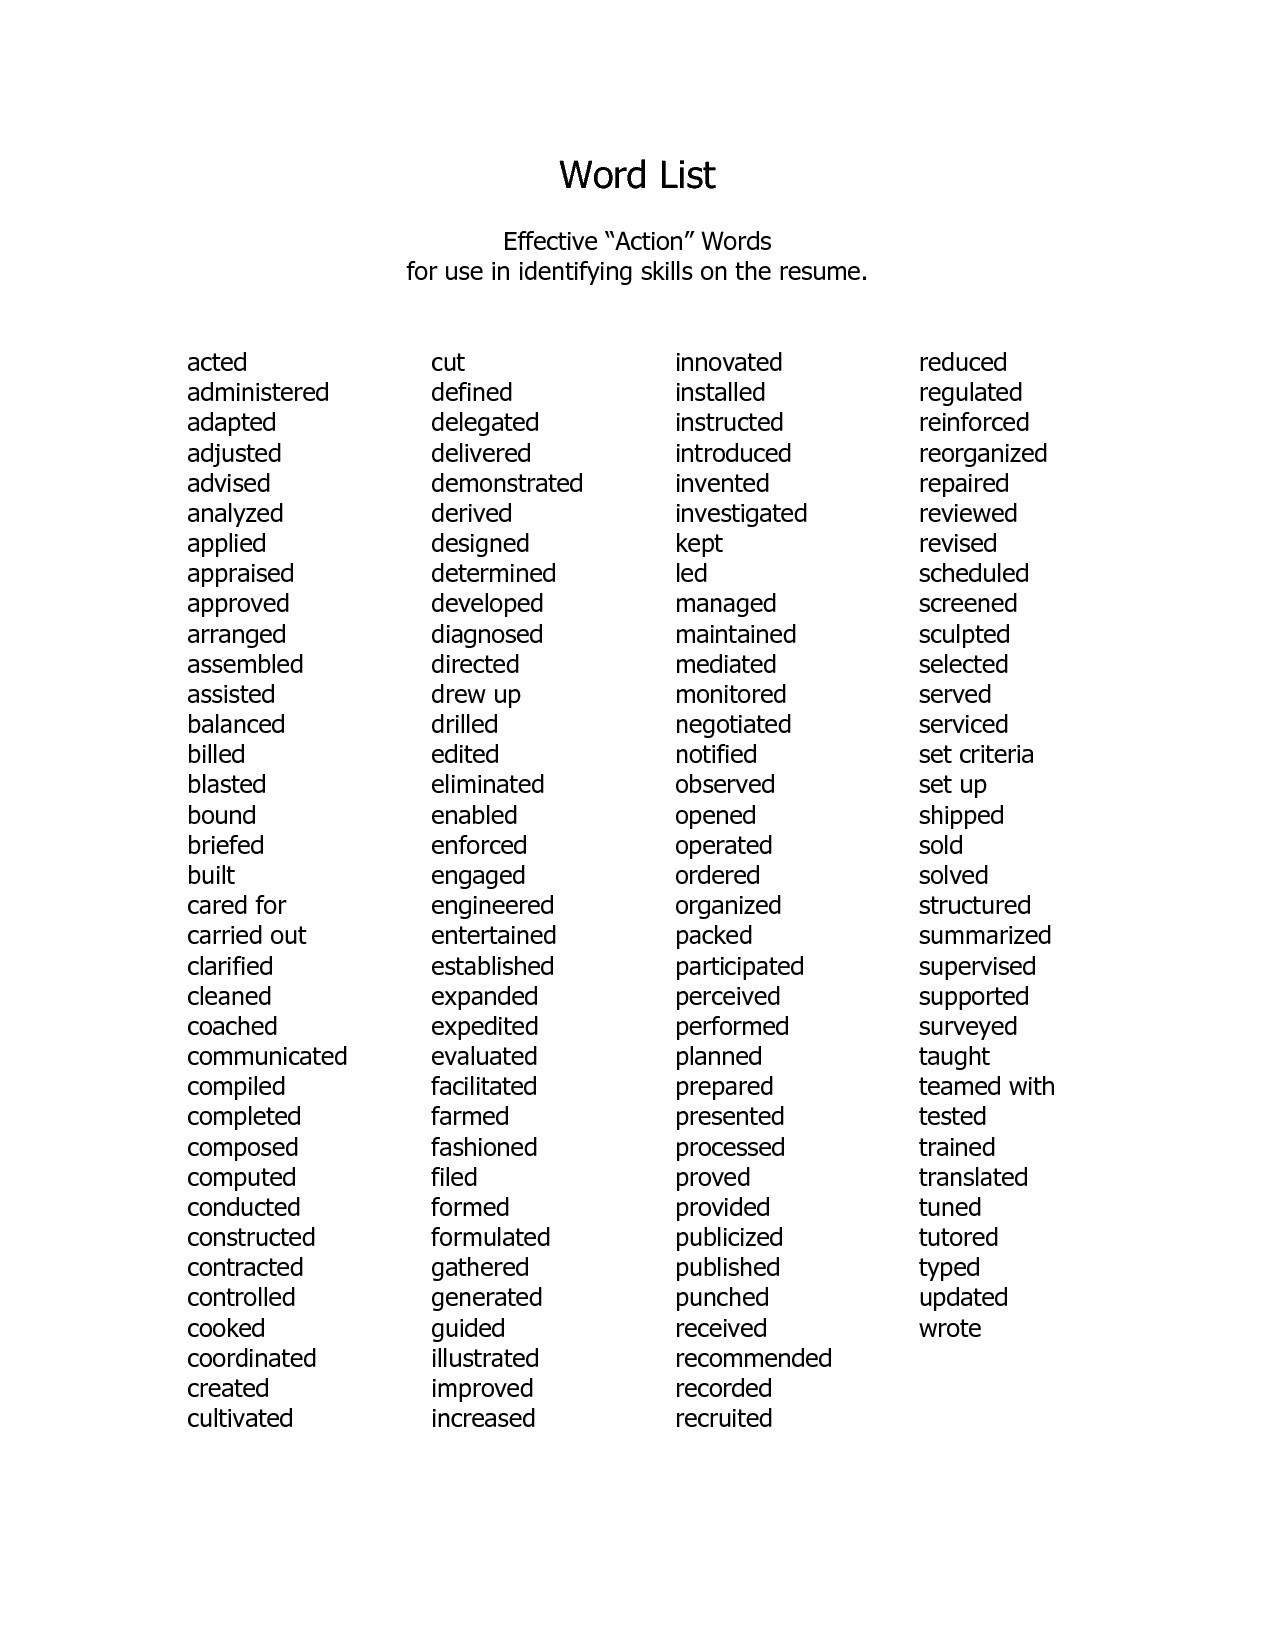 Resume Action Words List Of Action Verbs For Resume Beautiful Action Words Resume Resume Action Word List List Of Words For Of List Of Action Verbs For Resume At Action Words For Resume resume action words|wikiresume.com